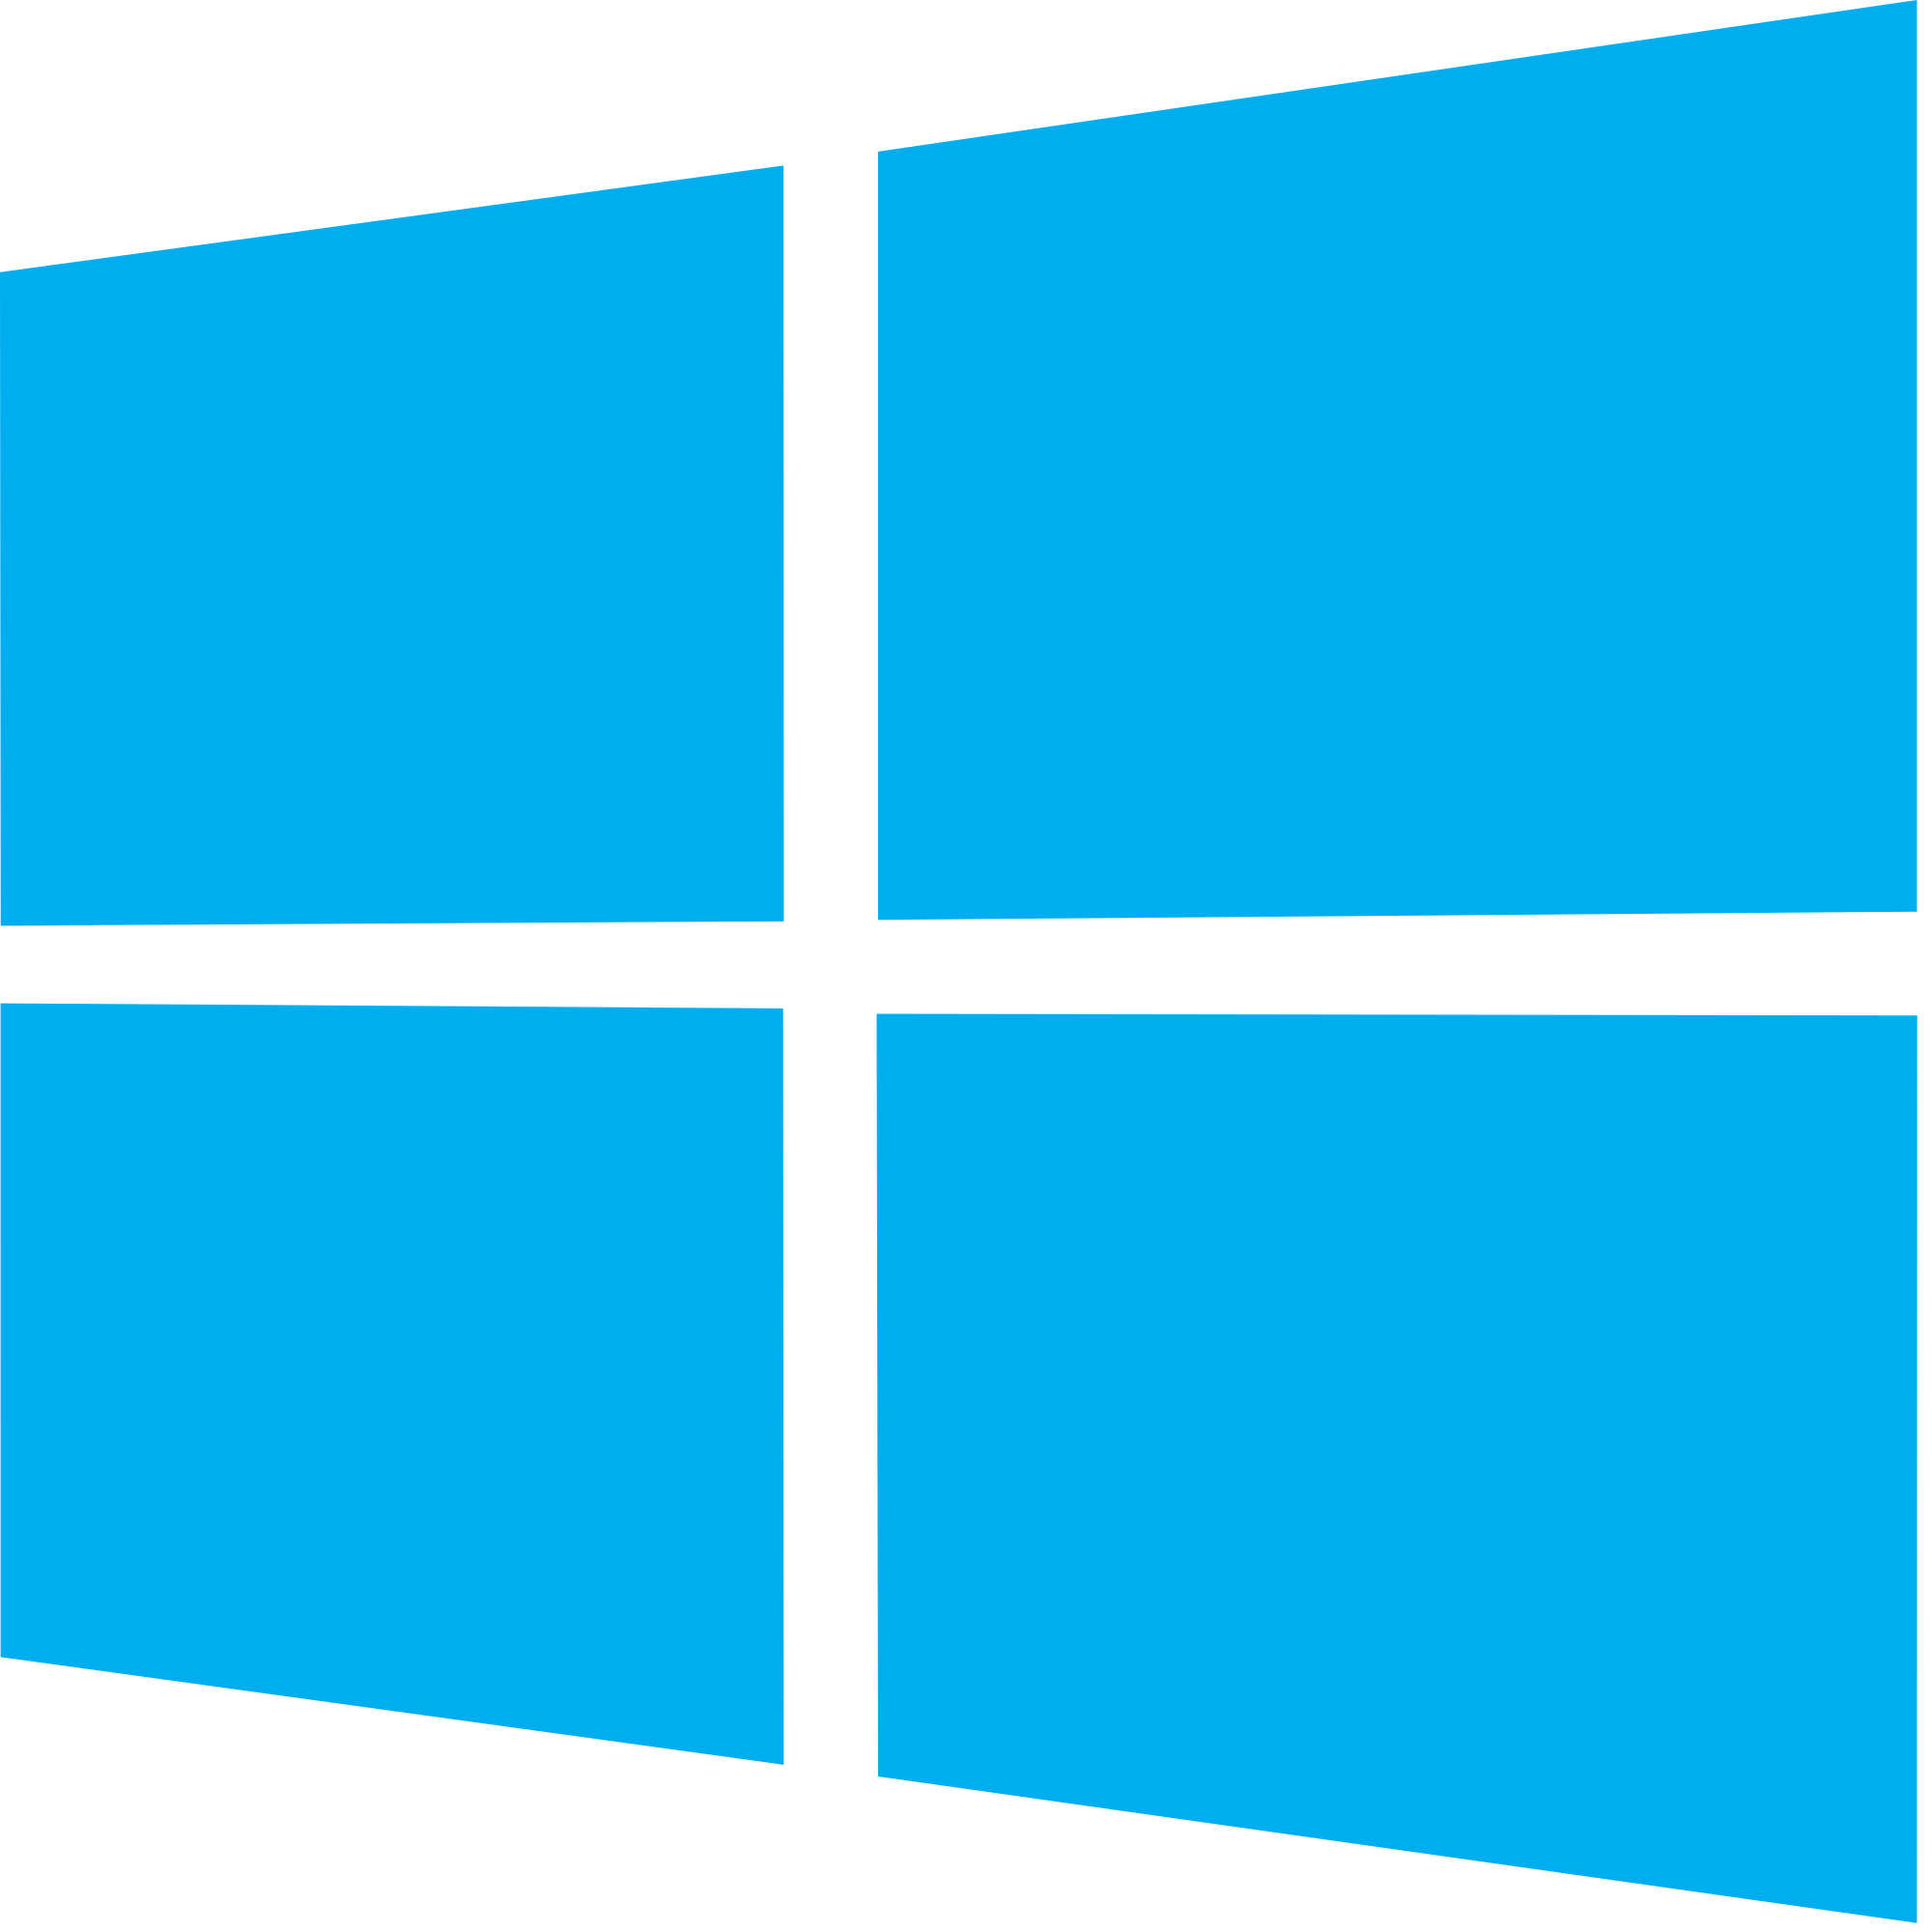 A picture of the Windows Logo